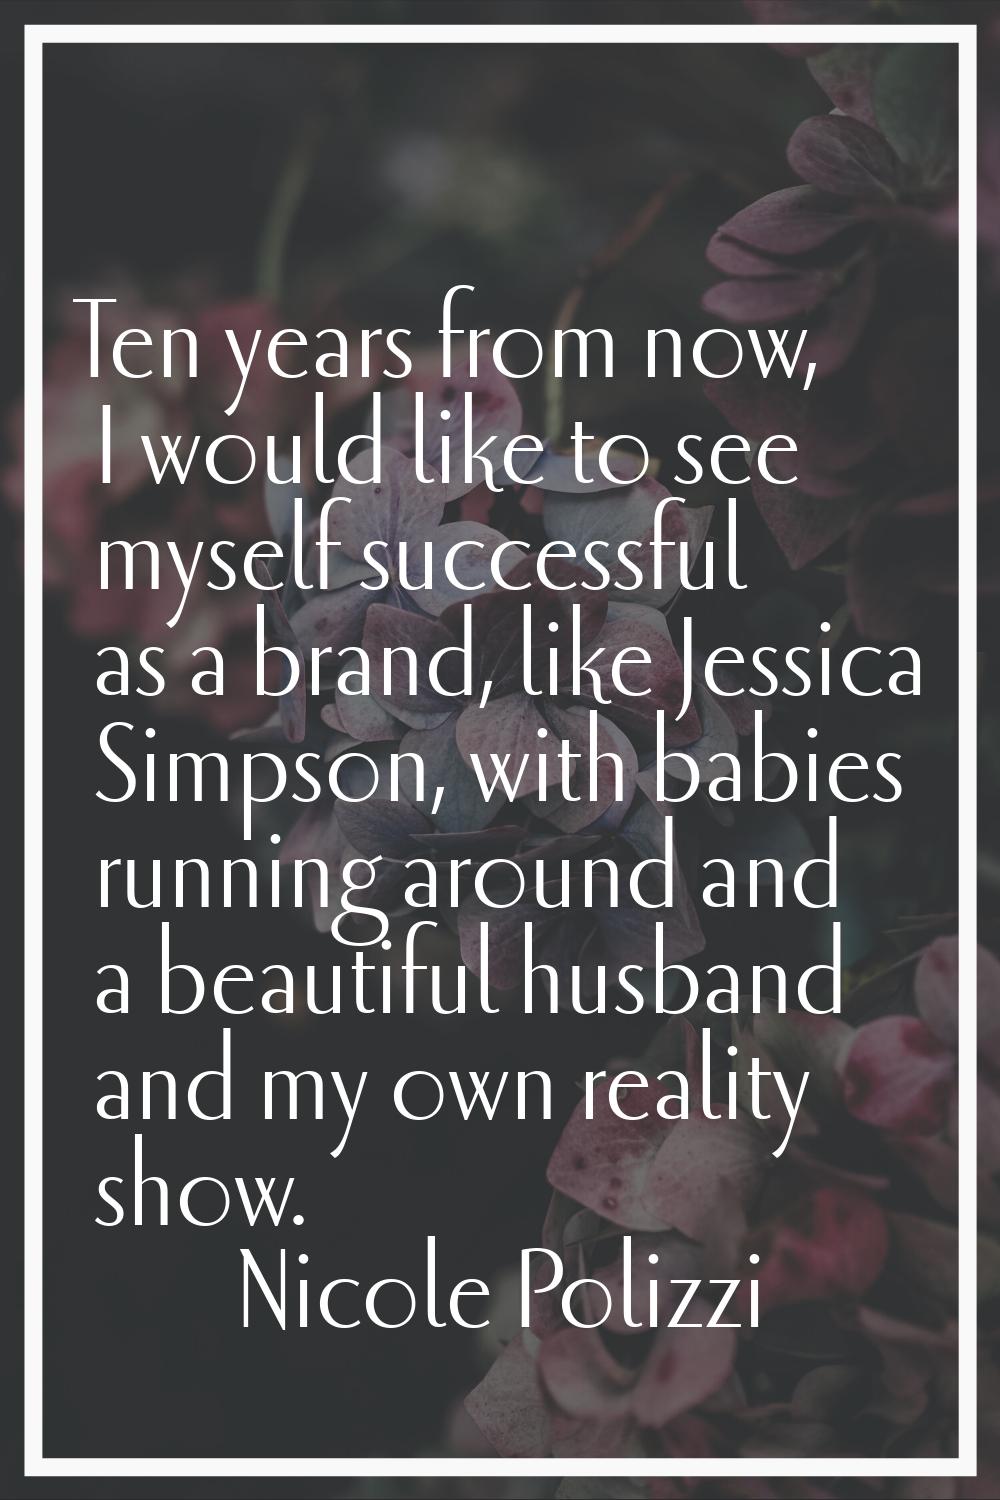 Ten years from now, I would like to see myself successful as a brand, like Jessica Simpson, with ba